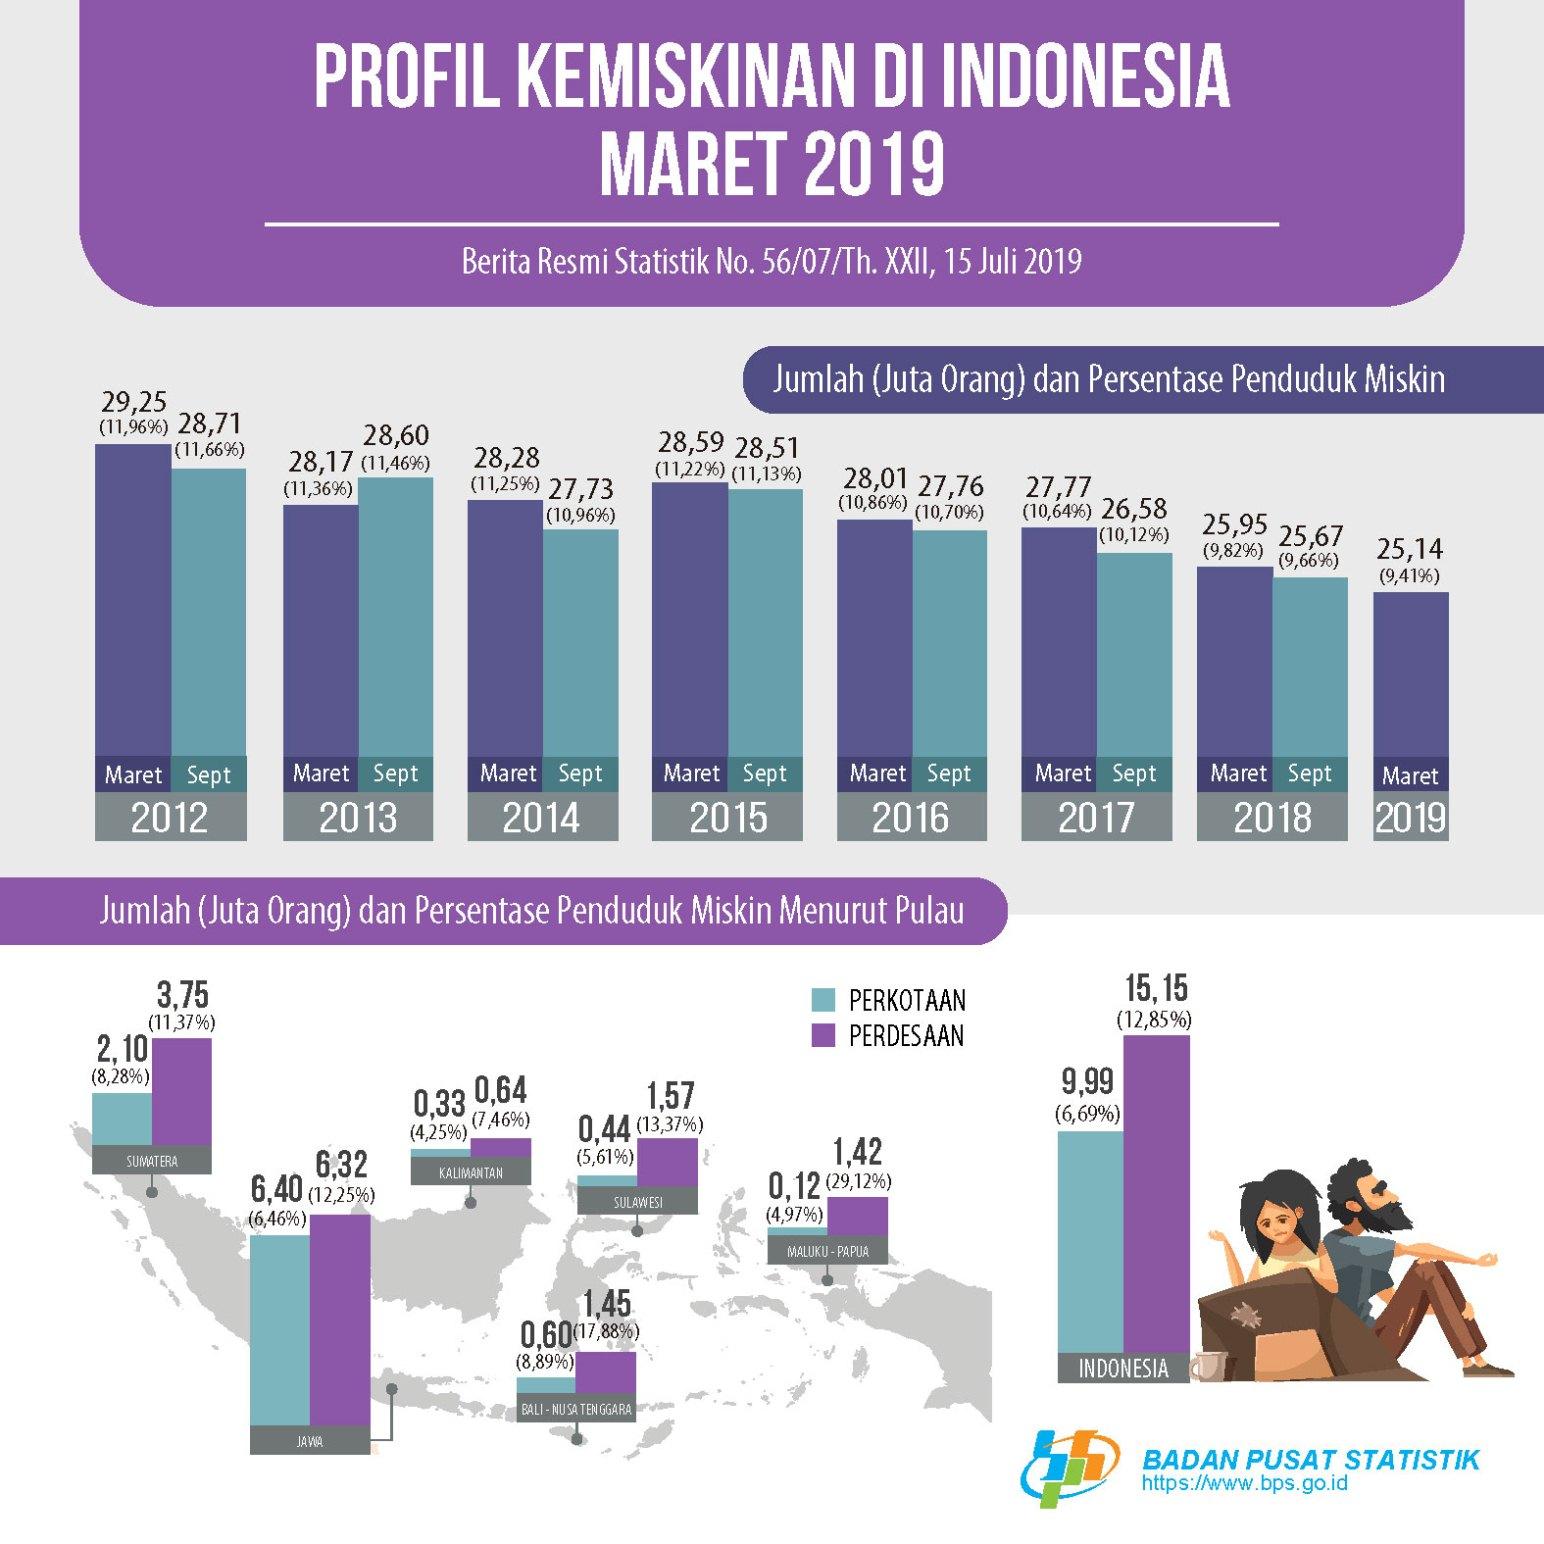 Percentage of Poor People March 2019 Reached 9.41 Percent